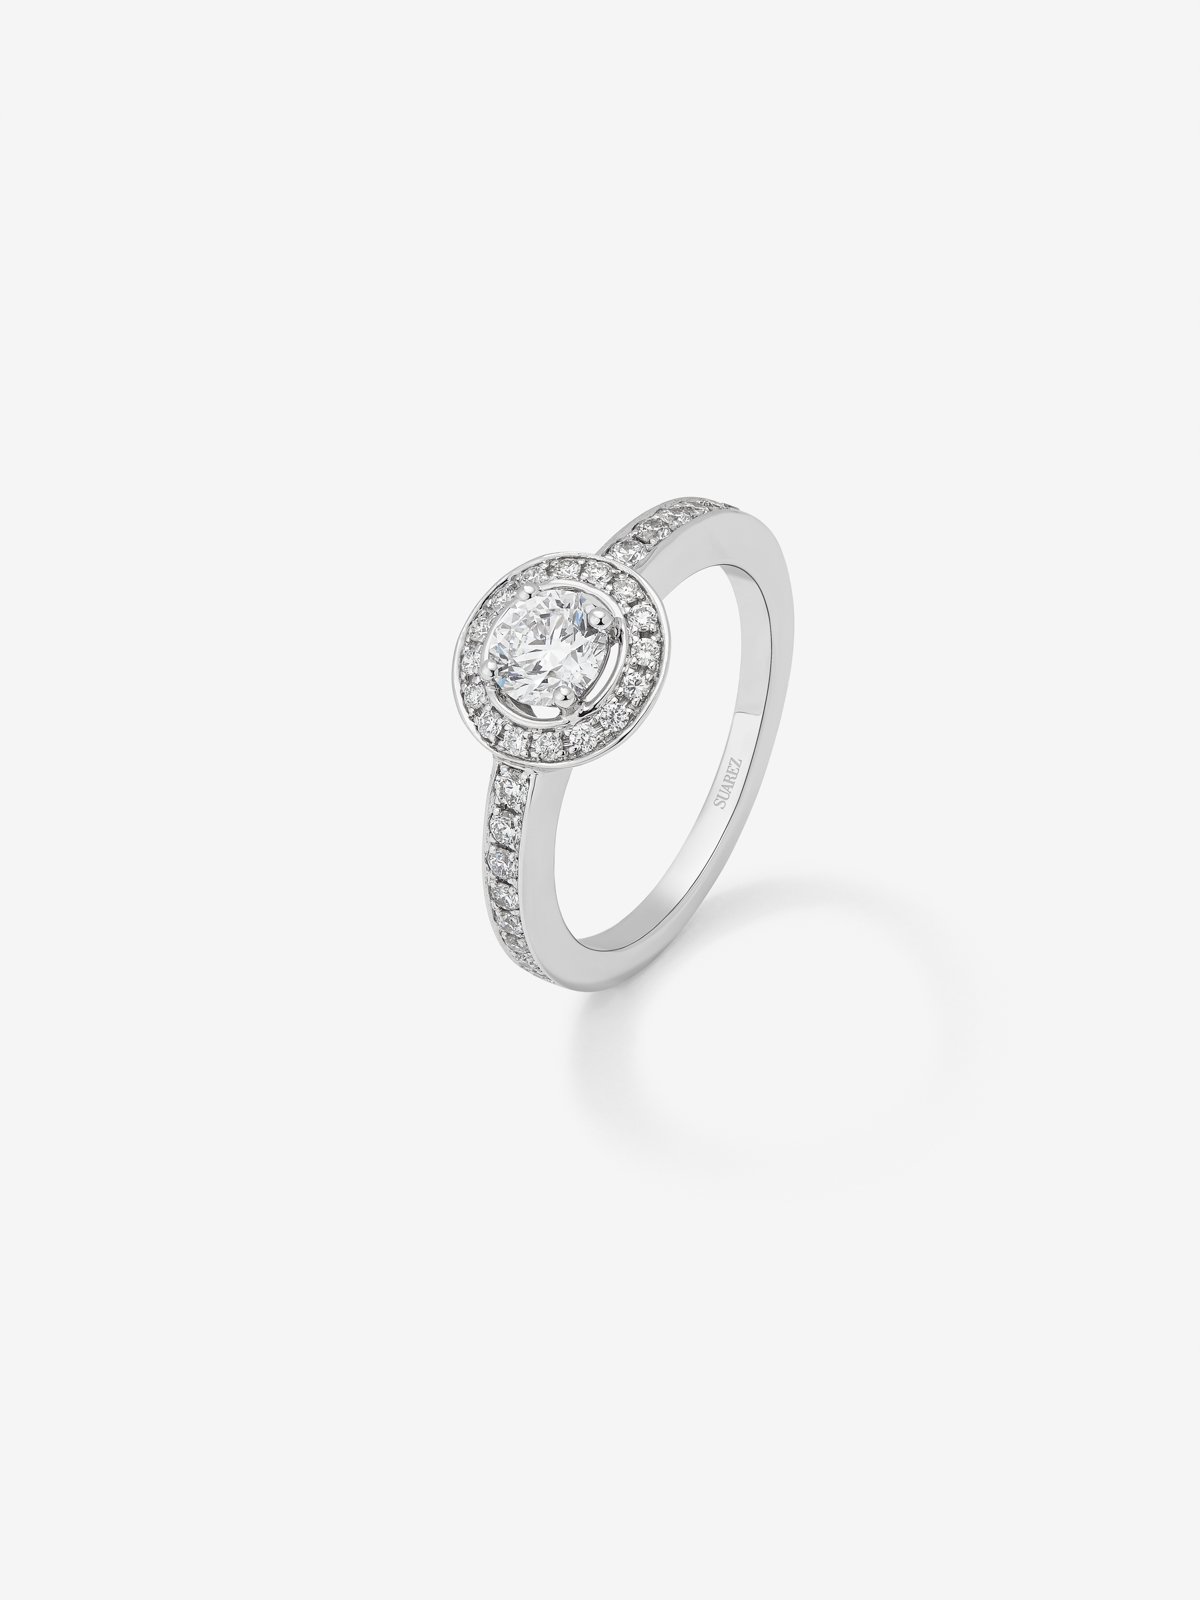 18K white gold engagement solitaire ring with a halo of diamonds